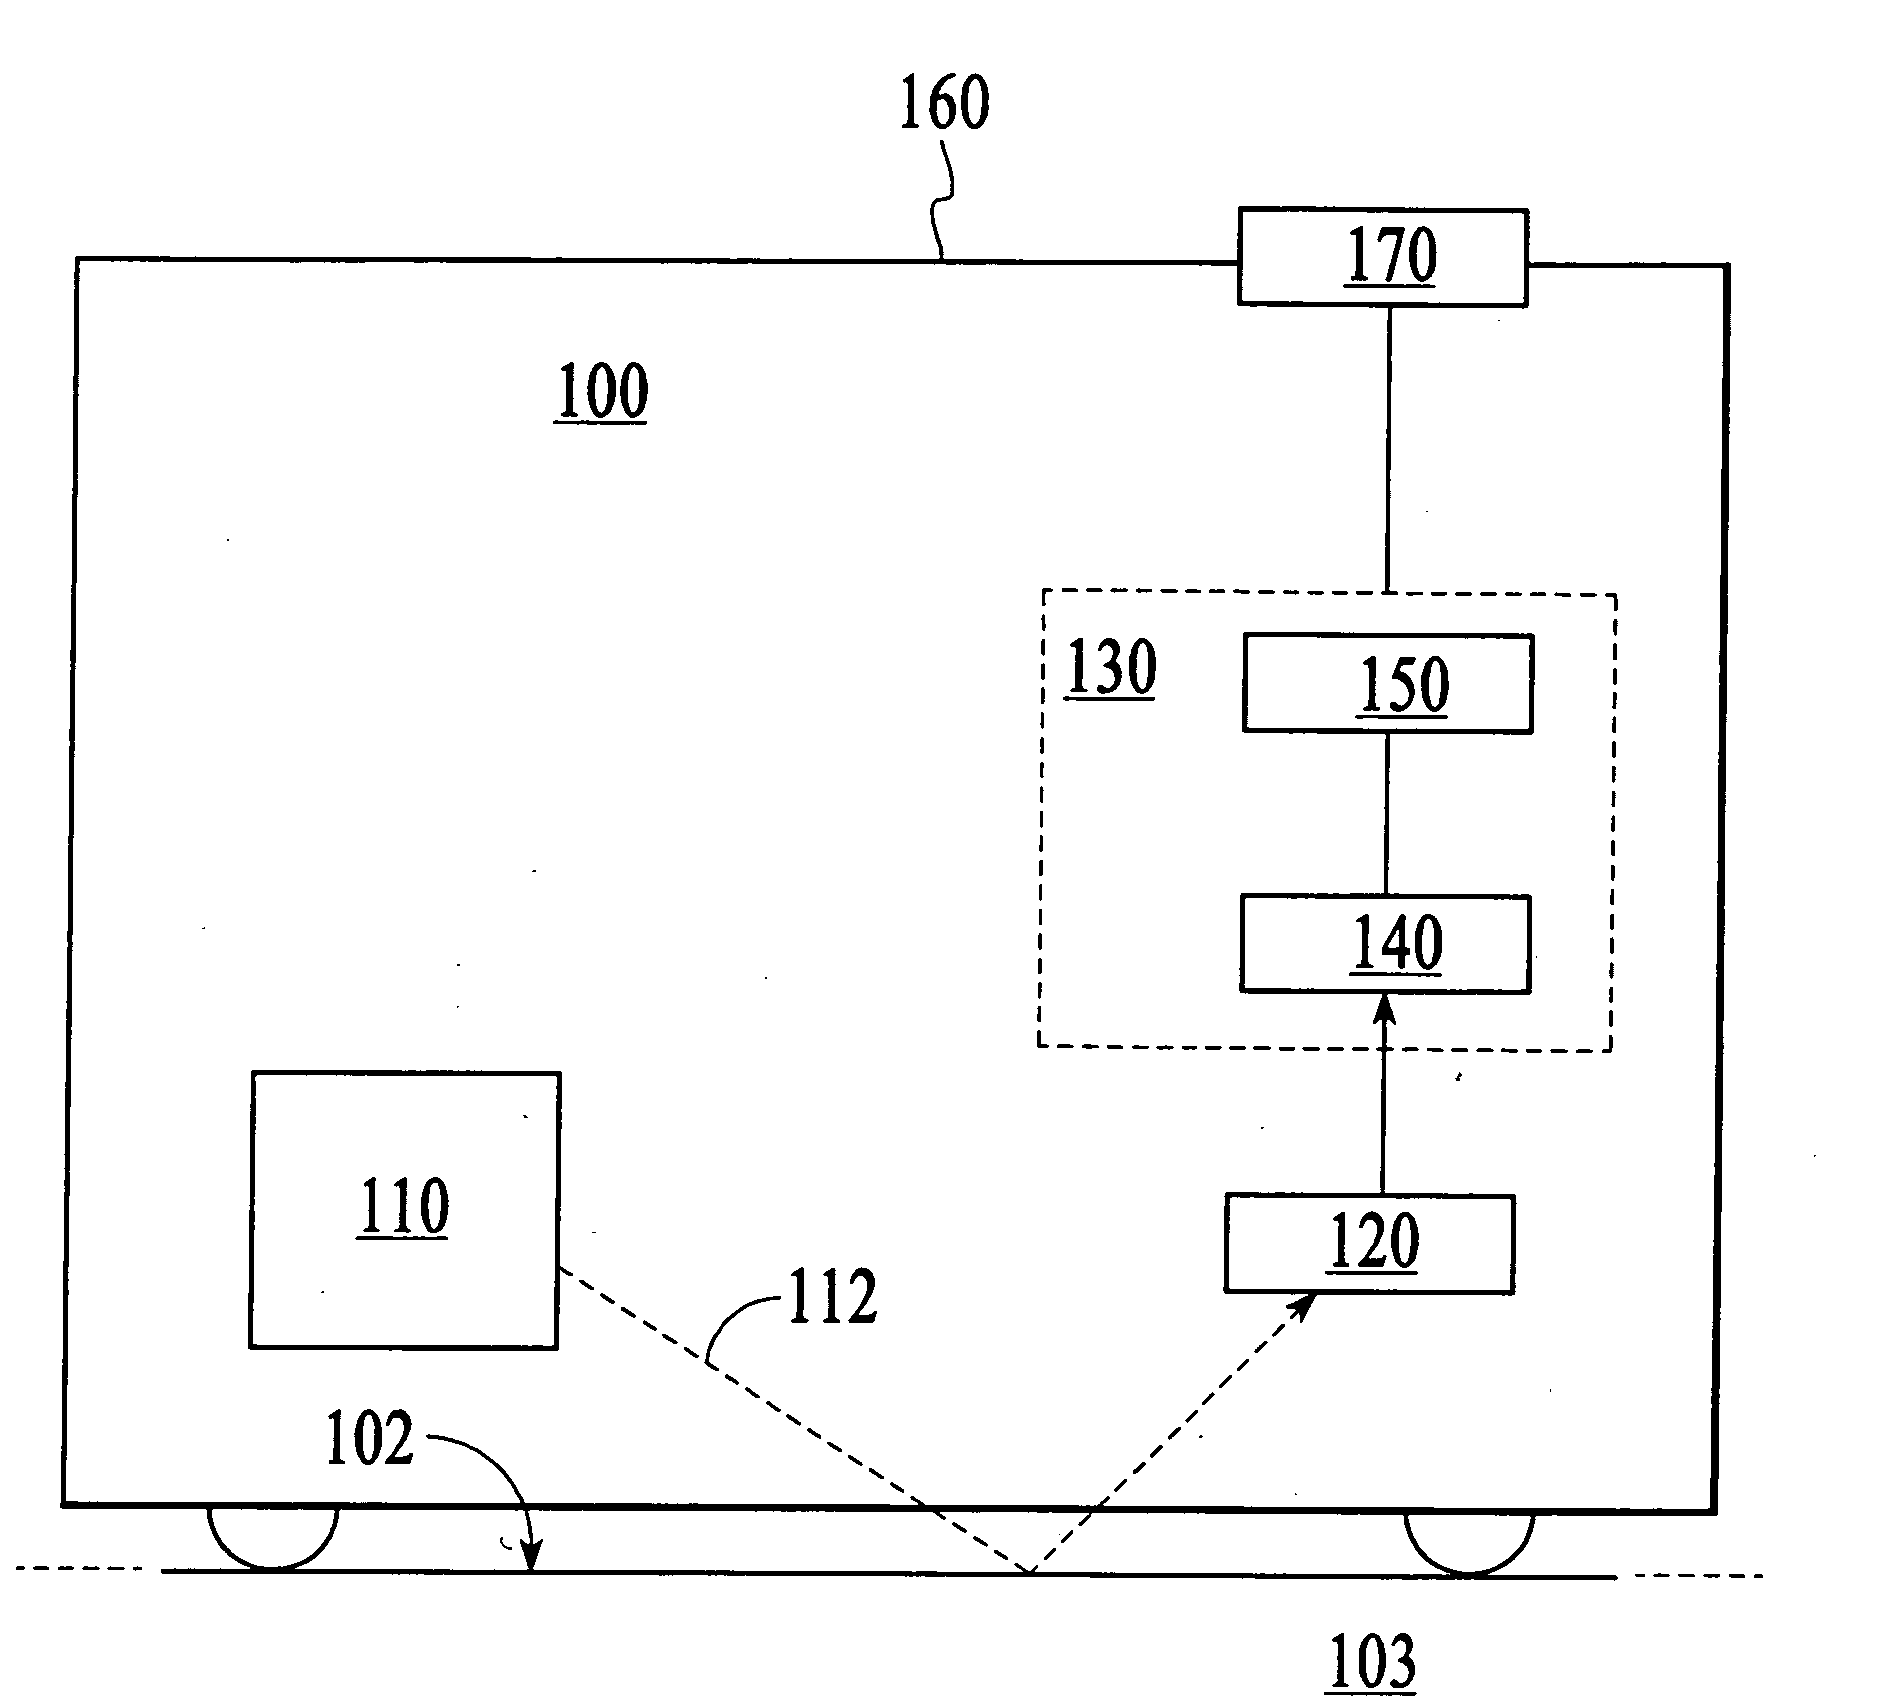 Programmable resolution for optical pointing device